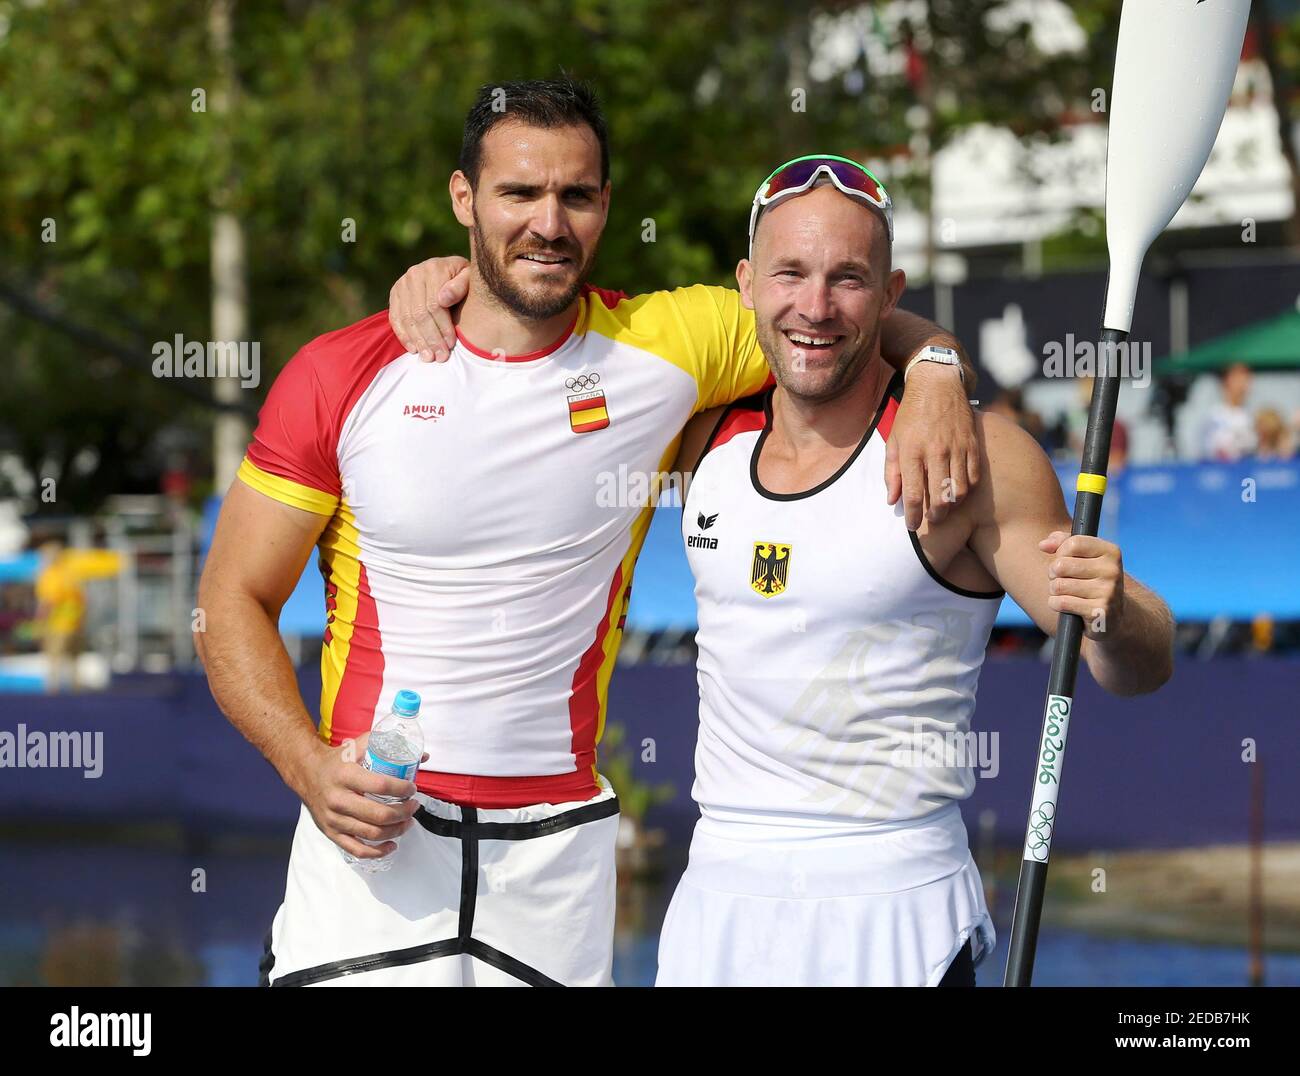 2016 Rio Olympics - Canoe Sprint - Final - Men's Kayak Single (K1) 200m - Final A/B - Lagoa Stadium - Rio de Janeiro, Brazil - 20/08/2016. Saul Craviotto (ESP) of Spain and Ronald Rauhe (GER) of Germany celebrate winning bronze after the K-1 200m final. REUTERS/Murad Sezer  FOR EDITORIAL USE ONLY. NOT FOR SALE FOR MARKETING OR ADVERTISING CAMPAIGNS.   Picture Supplied by Action Images Stock Photo